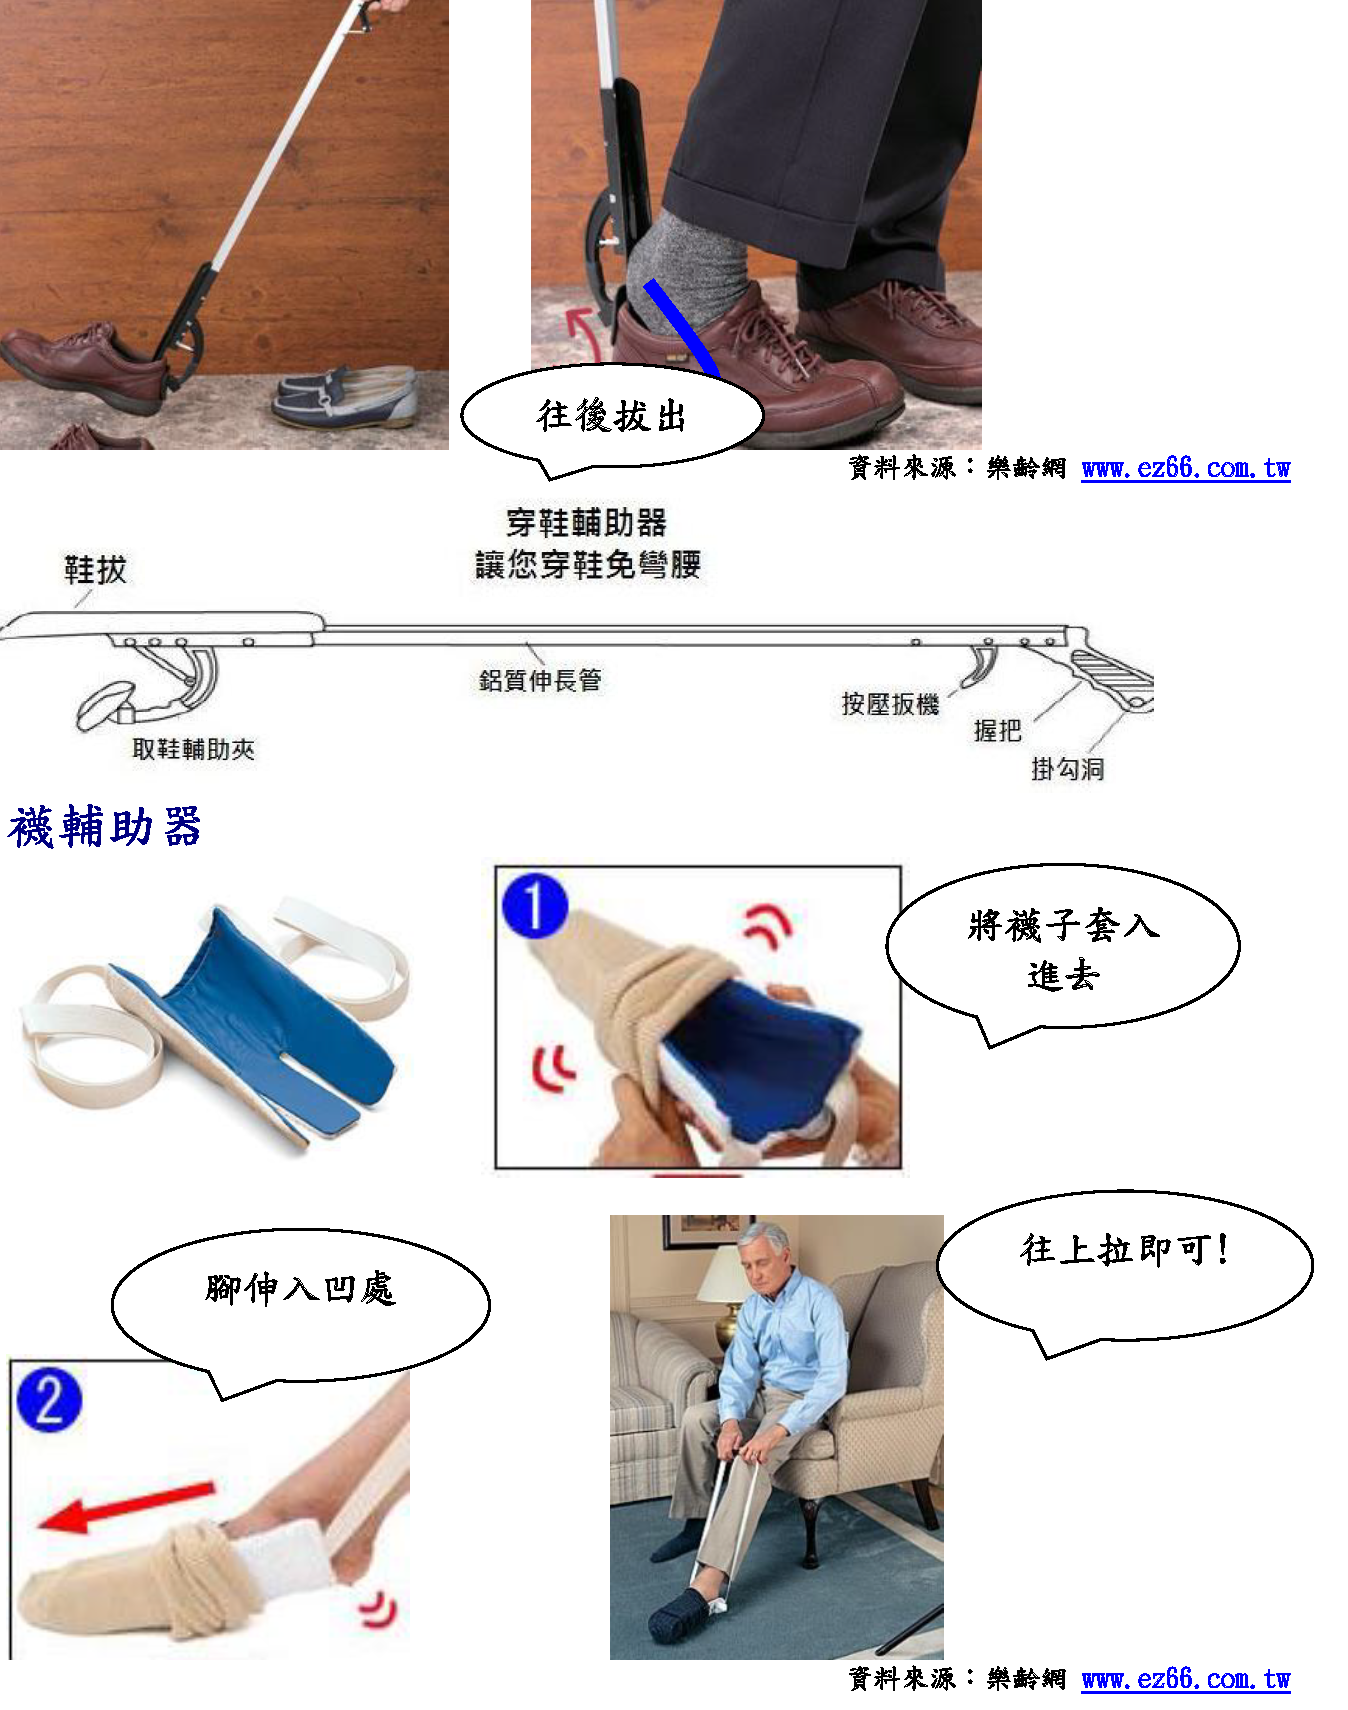 Care -Caregivers-aid-dressing.png